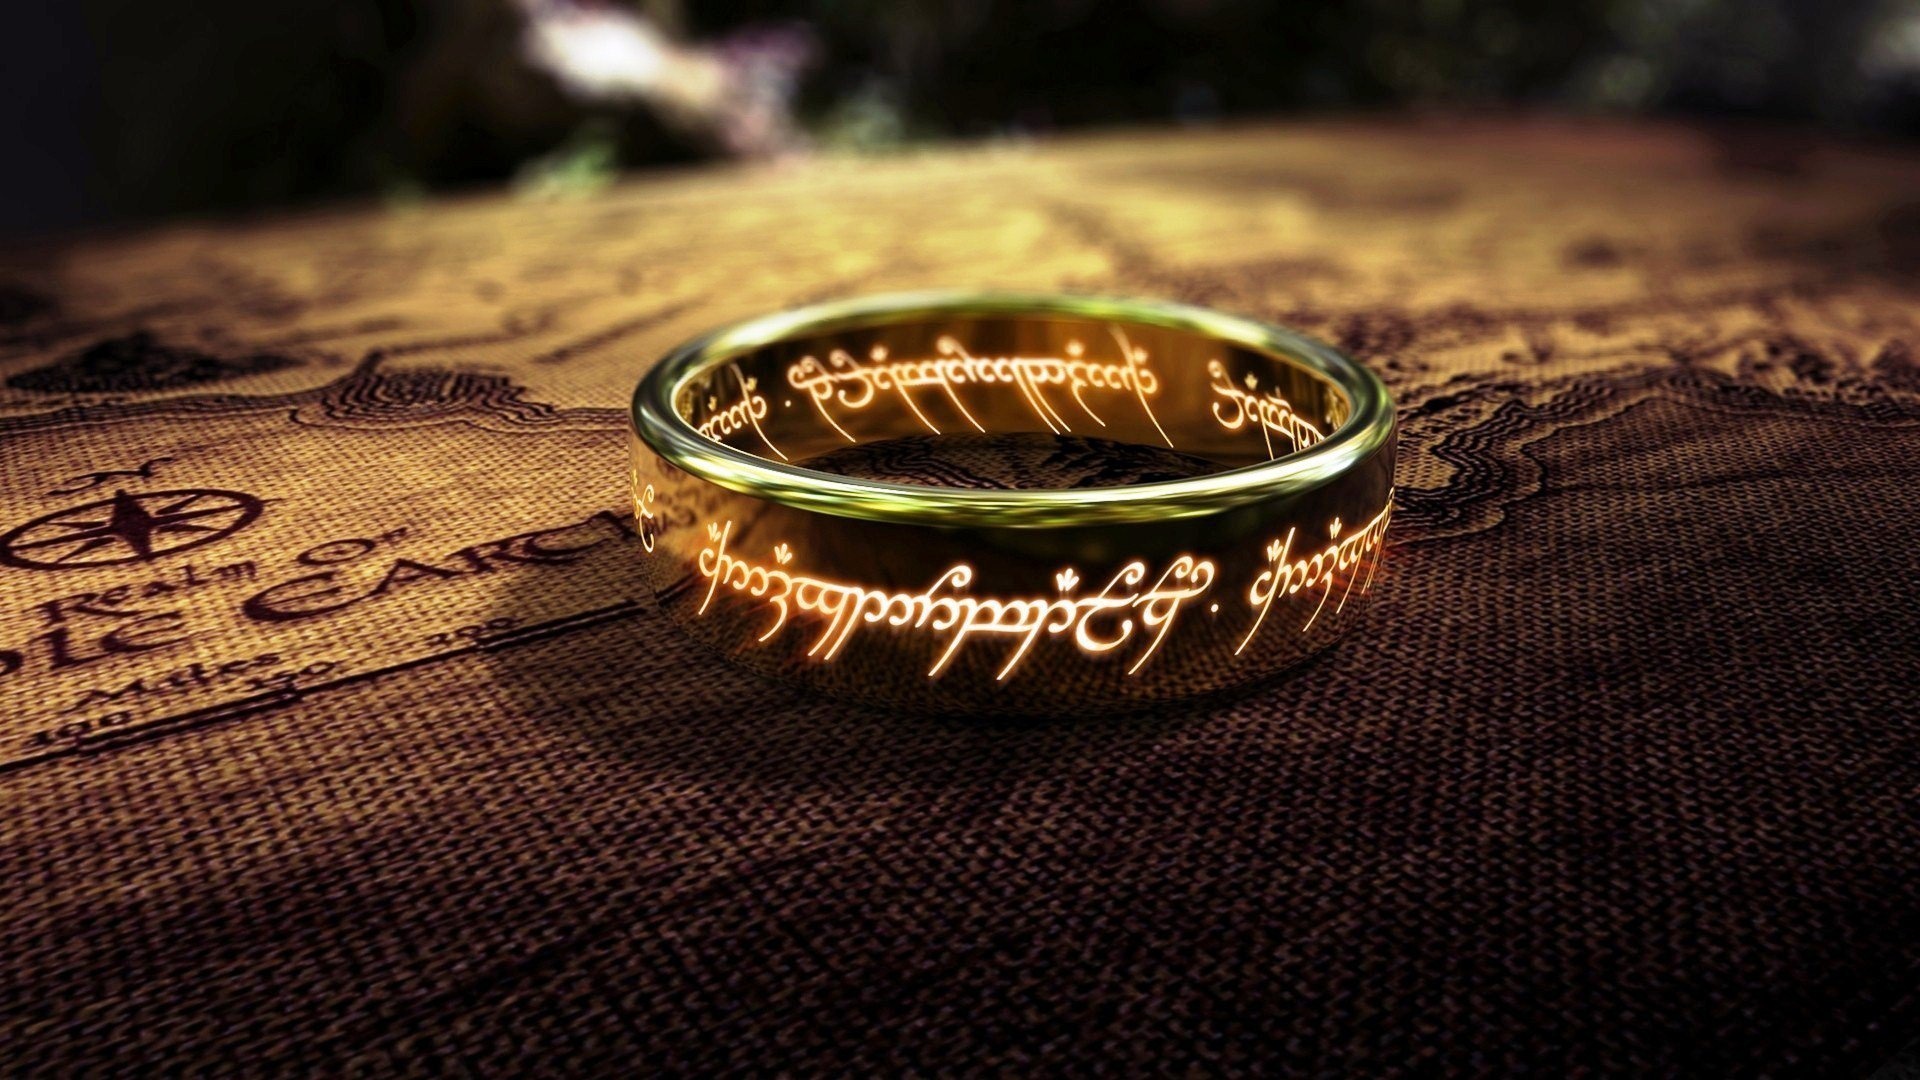 The Lord of the Rings, Soundtrack music, Complete song list, Tunefind database, 1920x1080 Full HD Desktop